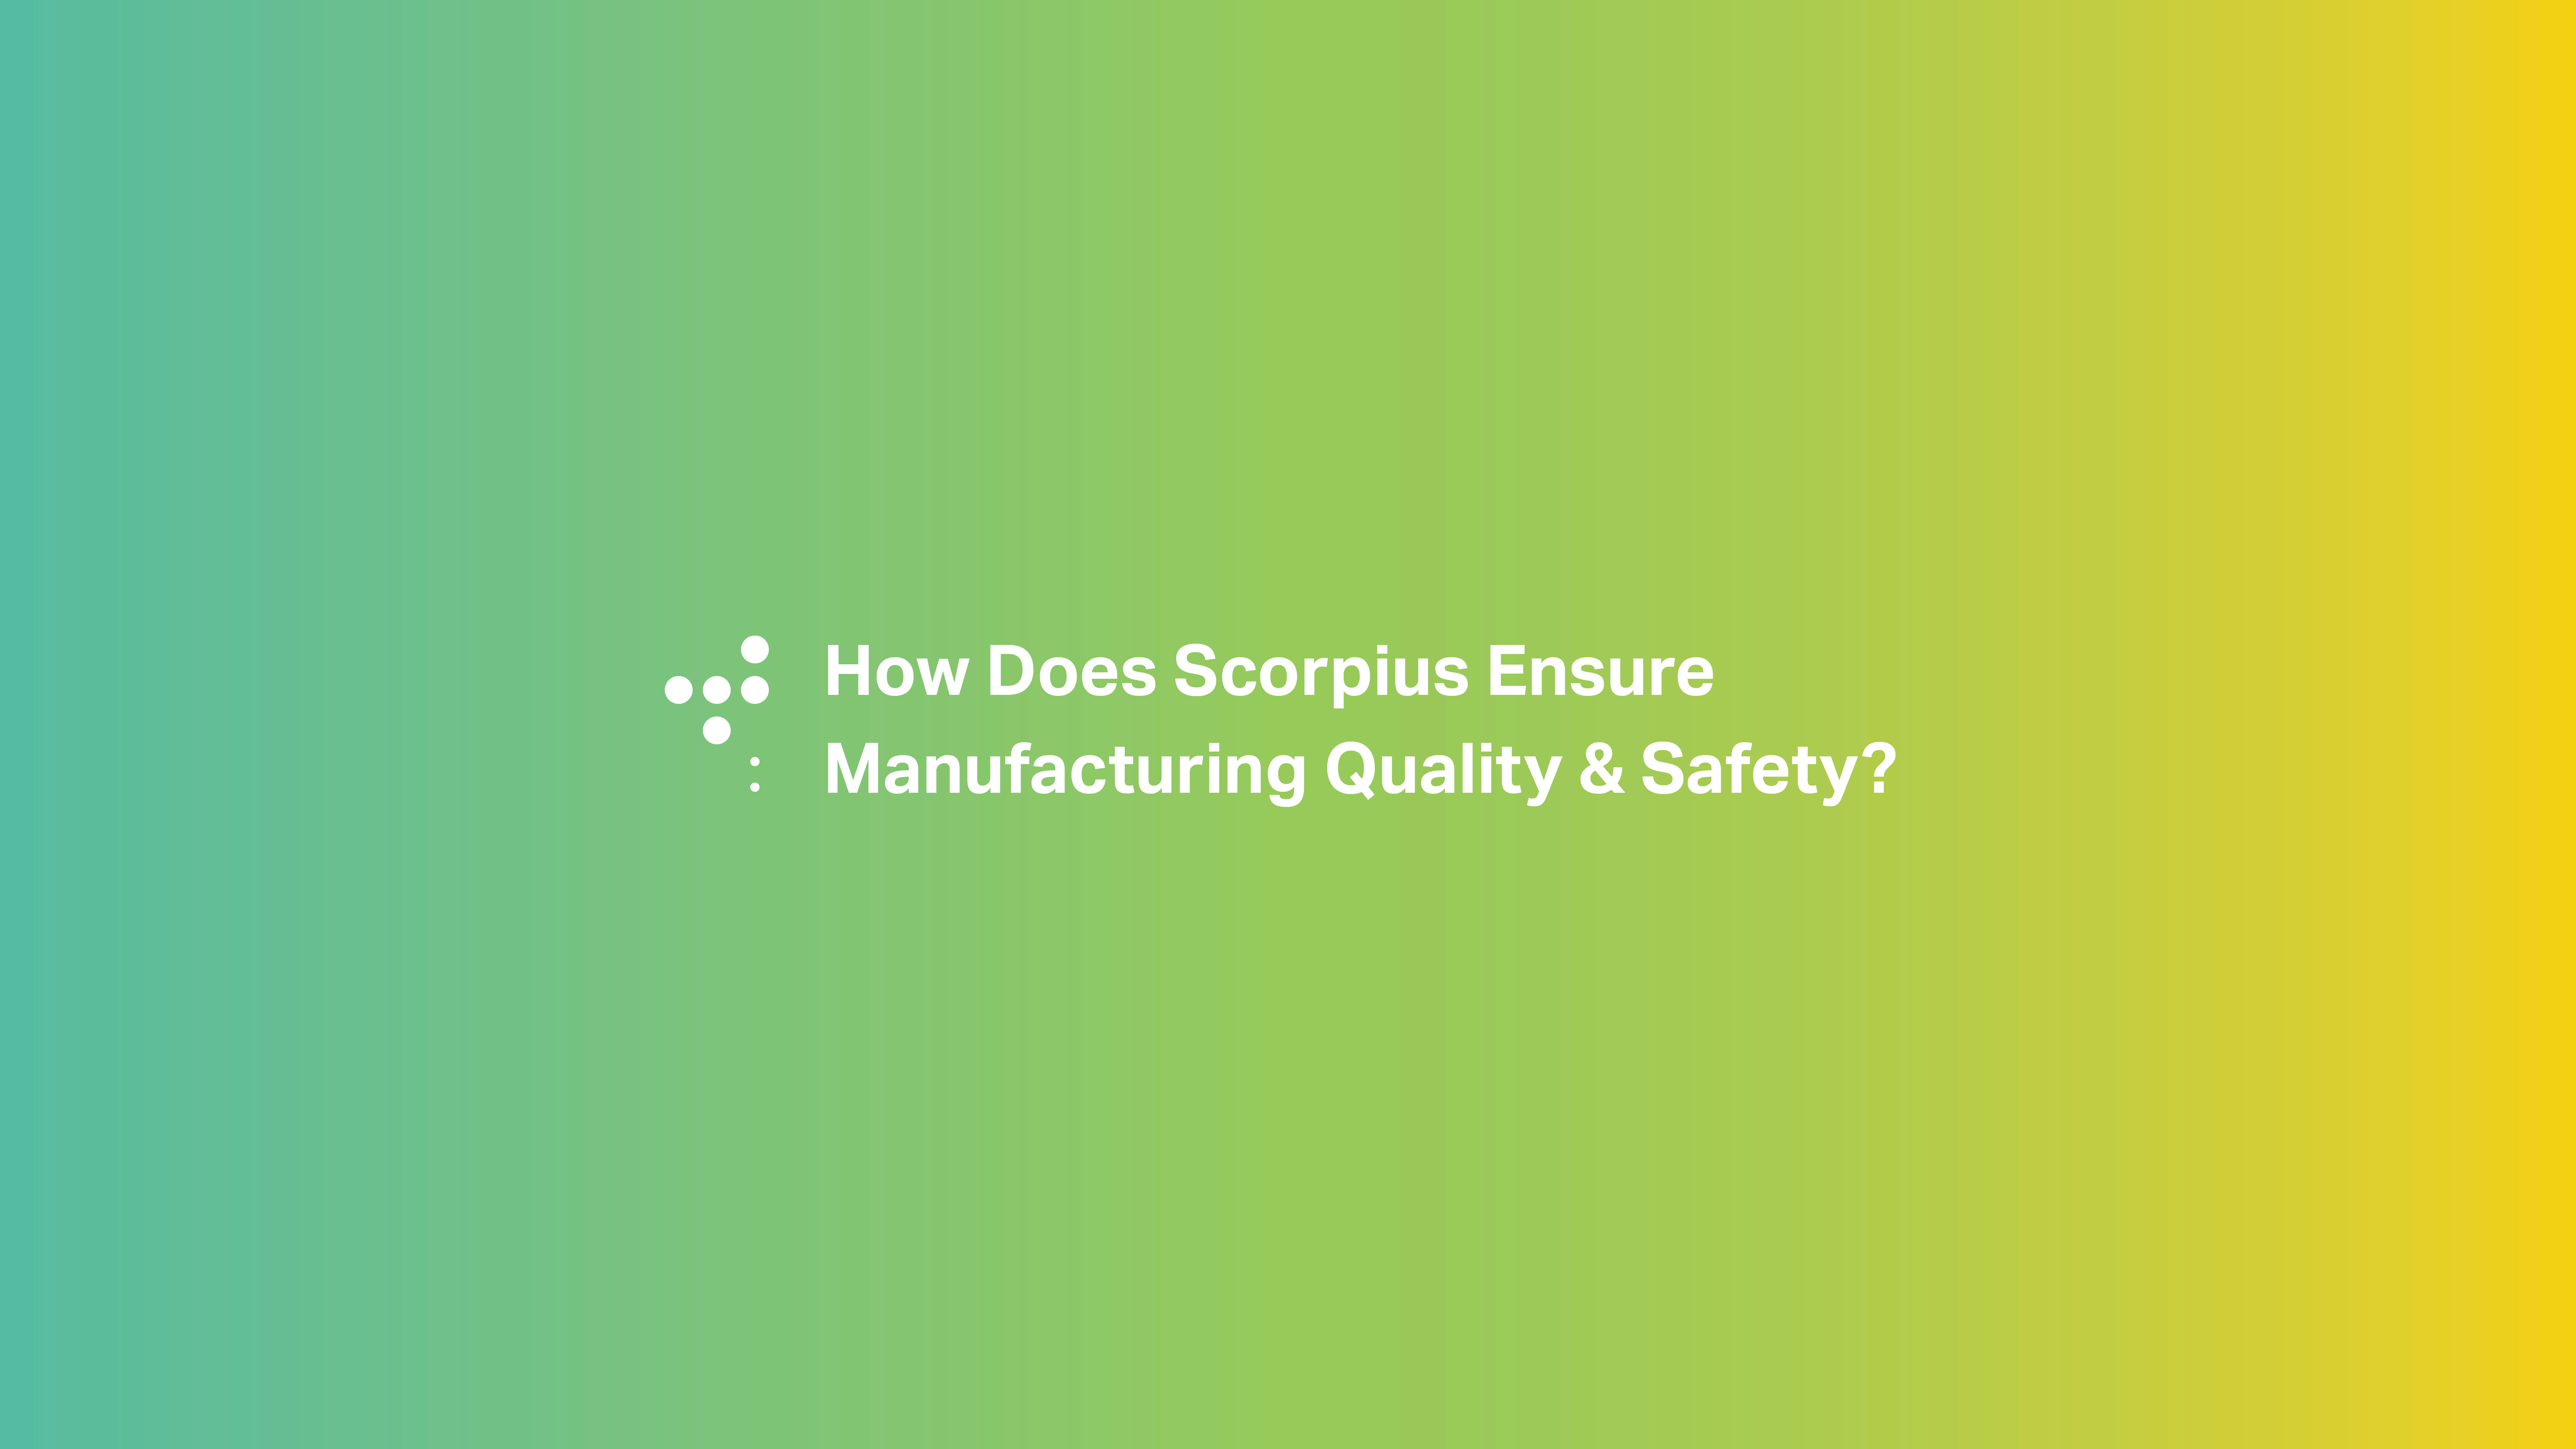 How does Scorpius ensure manufacturing quality and safety?